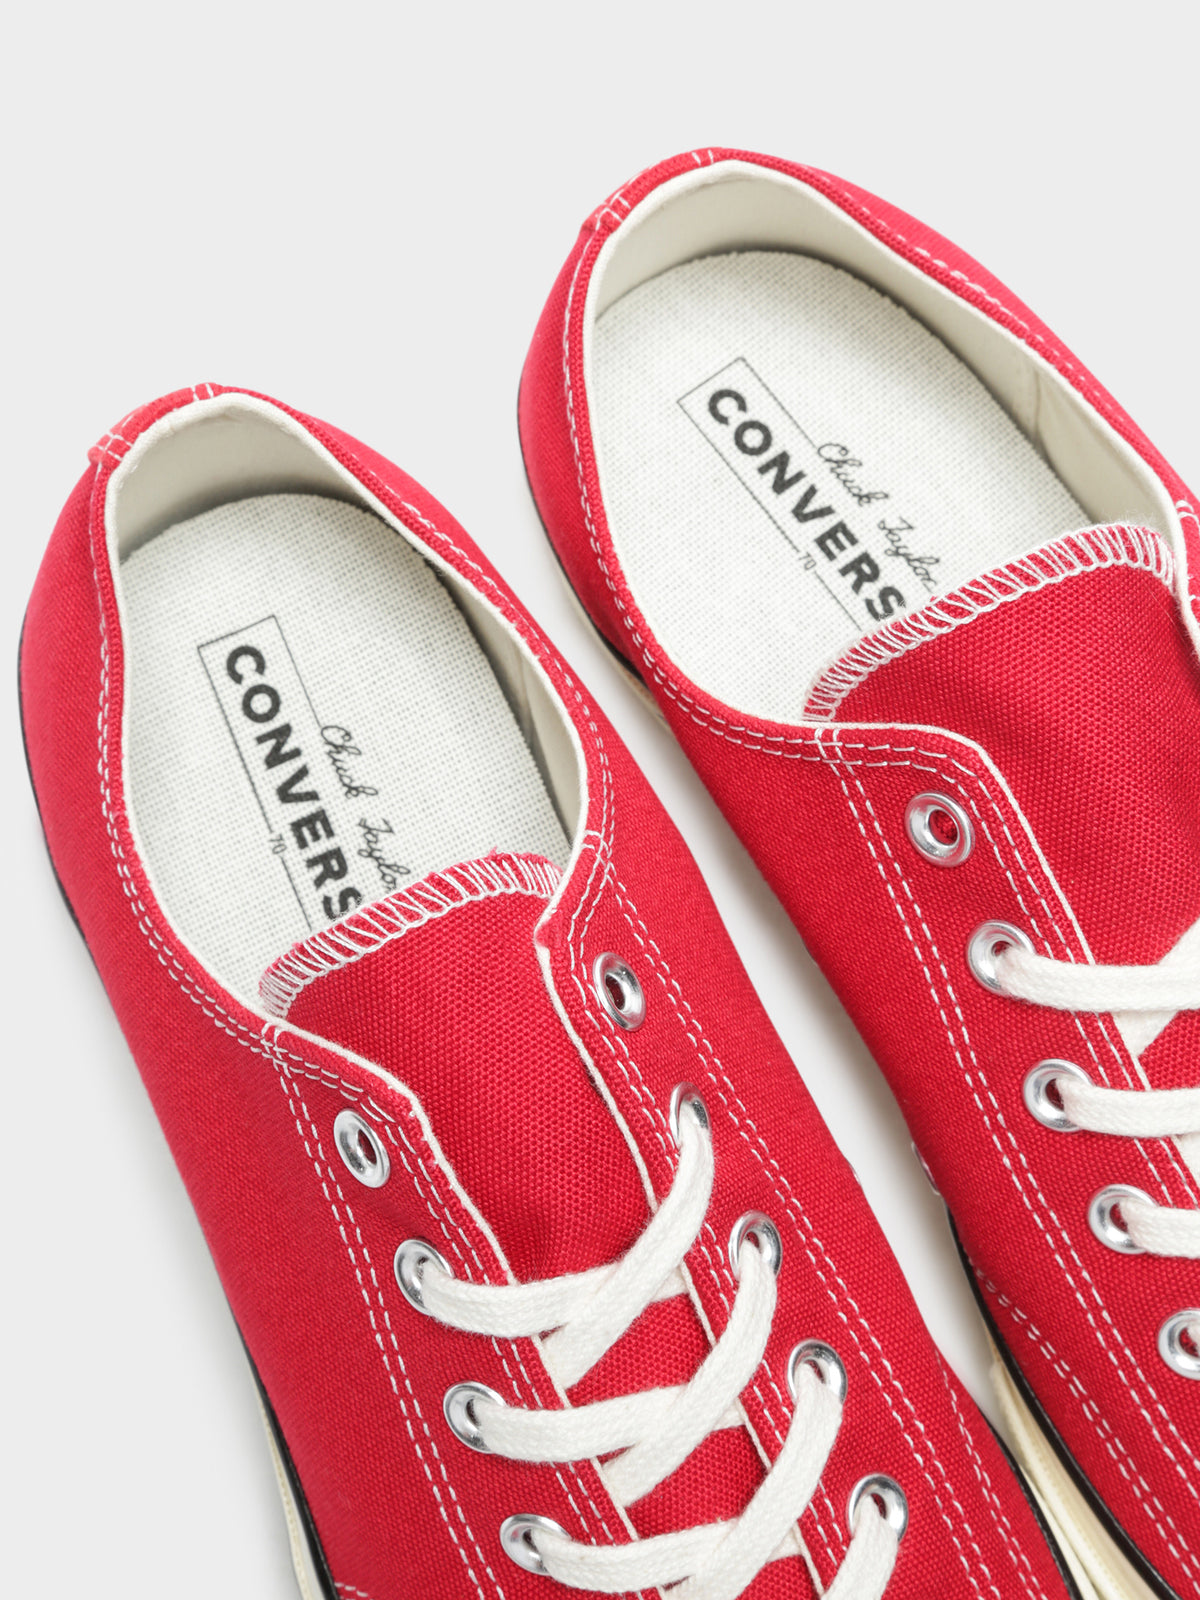 Unisex Chuck Taylor 70 Vintage Canvas Sneaker in Red